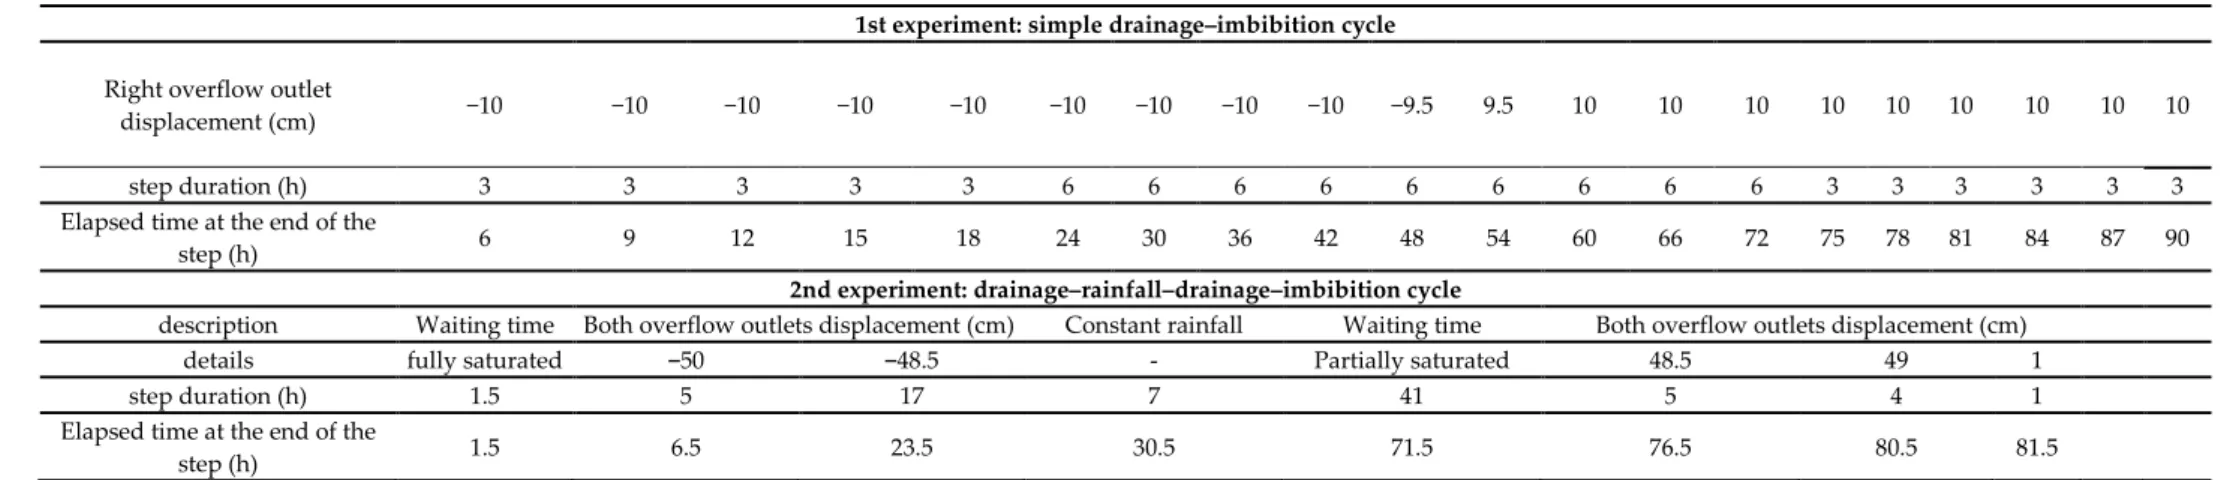 Table 1. Experimental procedure: movement of the overflow outlet responsible of transient flow in the flow chamber